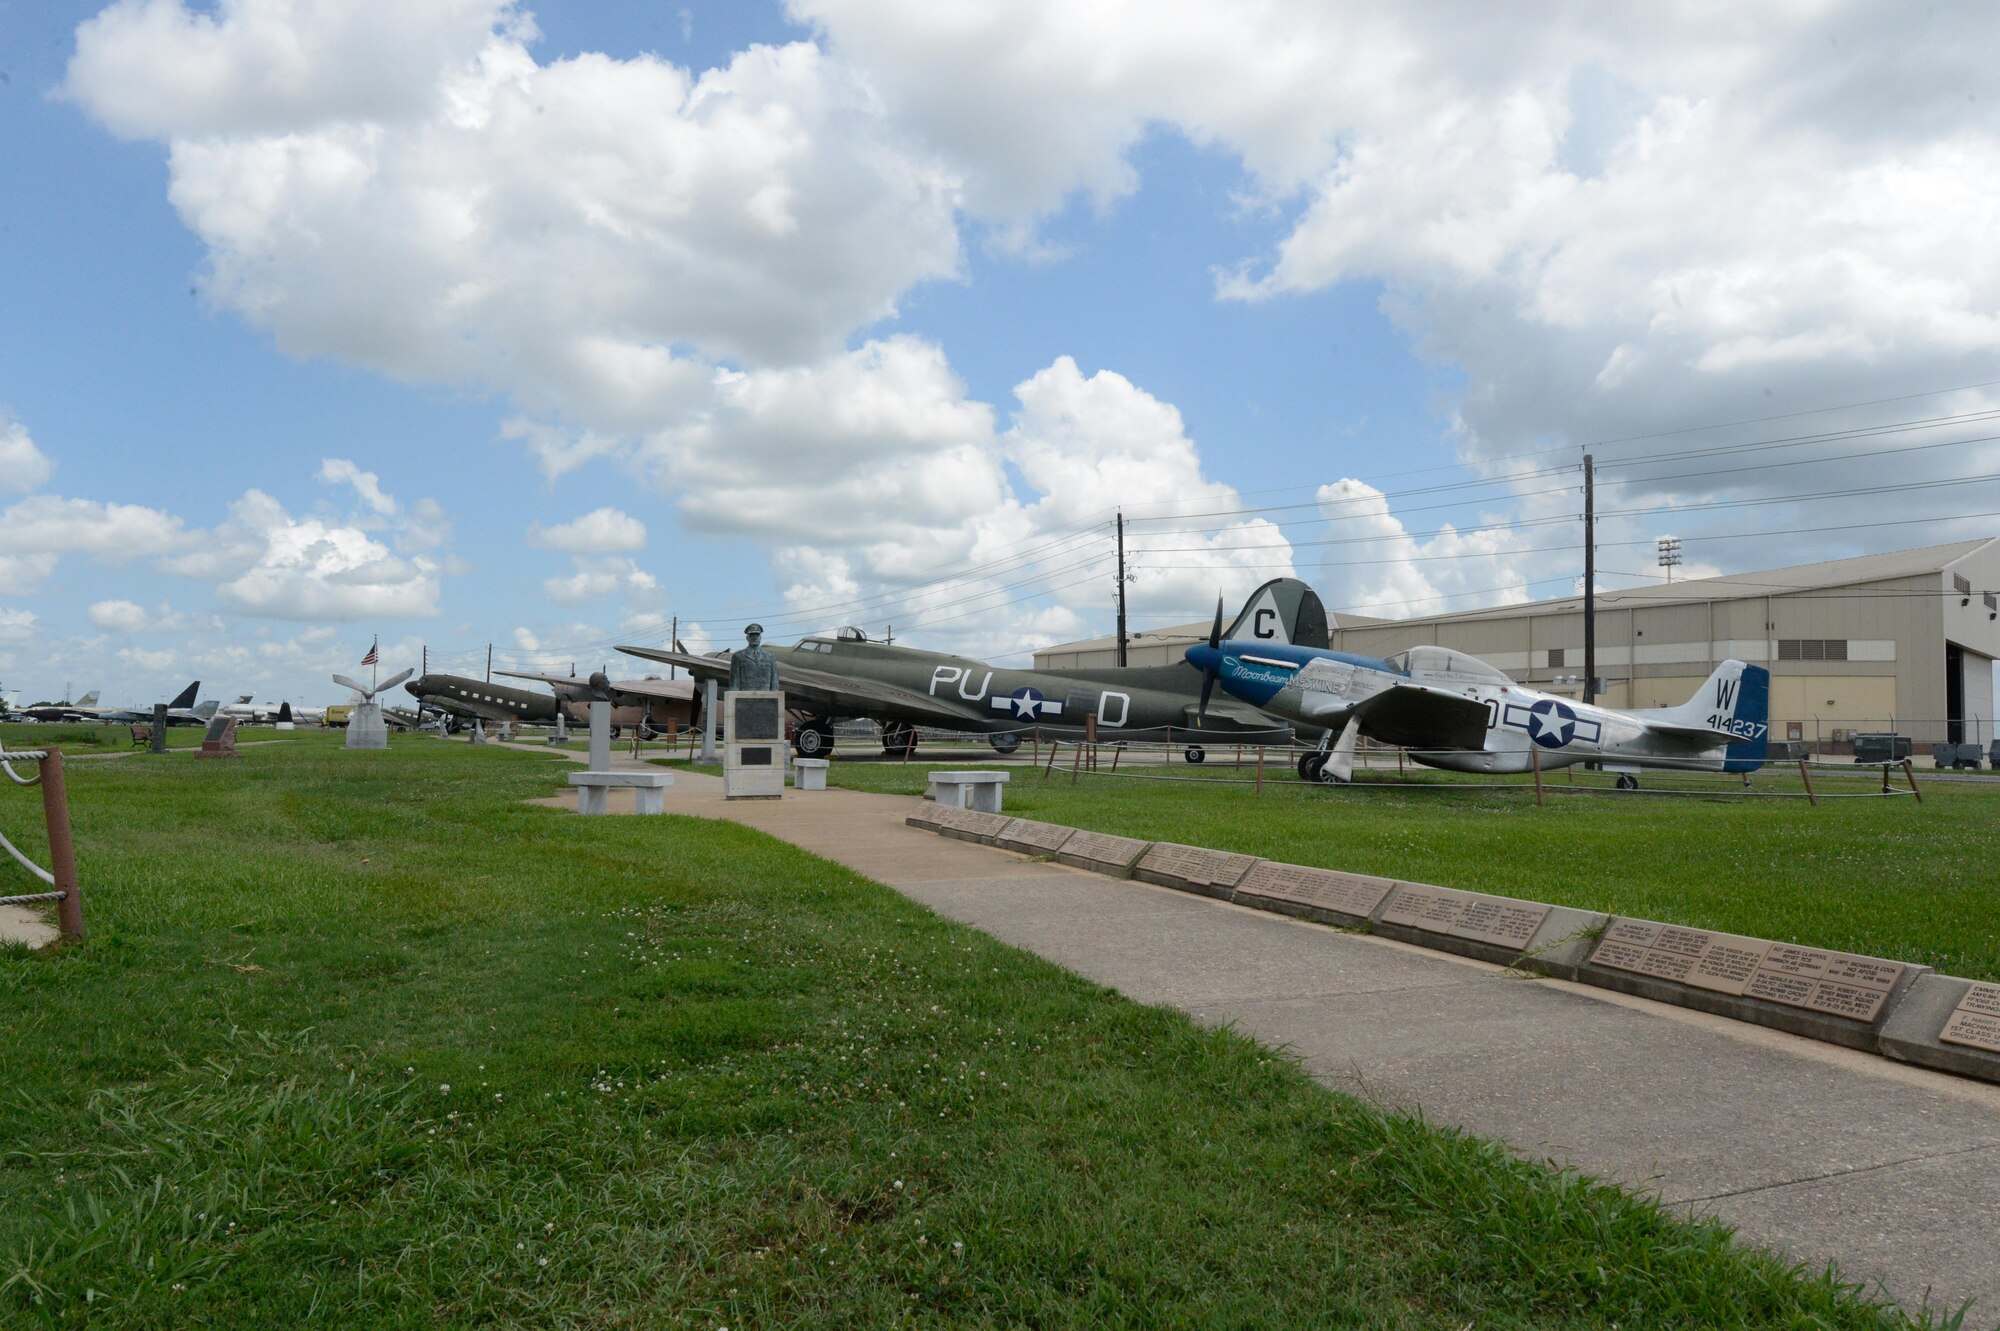 The Barksdale Global Power Museum displays multiple aircraft throughout aviation history for museum visitors at Barksdale Air Force Base, La., July 12, 2017. The aircraft serve as a reminder of the achievements of past Airmen and Air Force history.